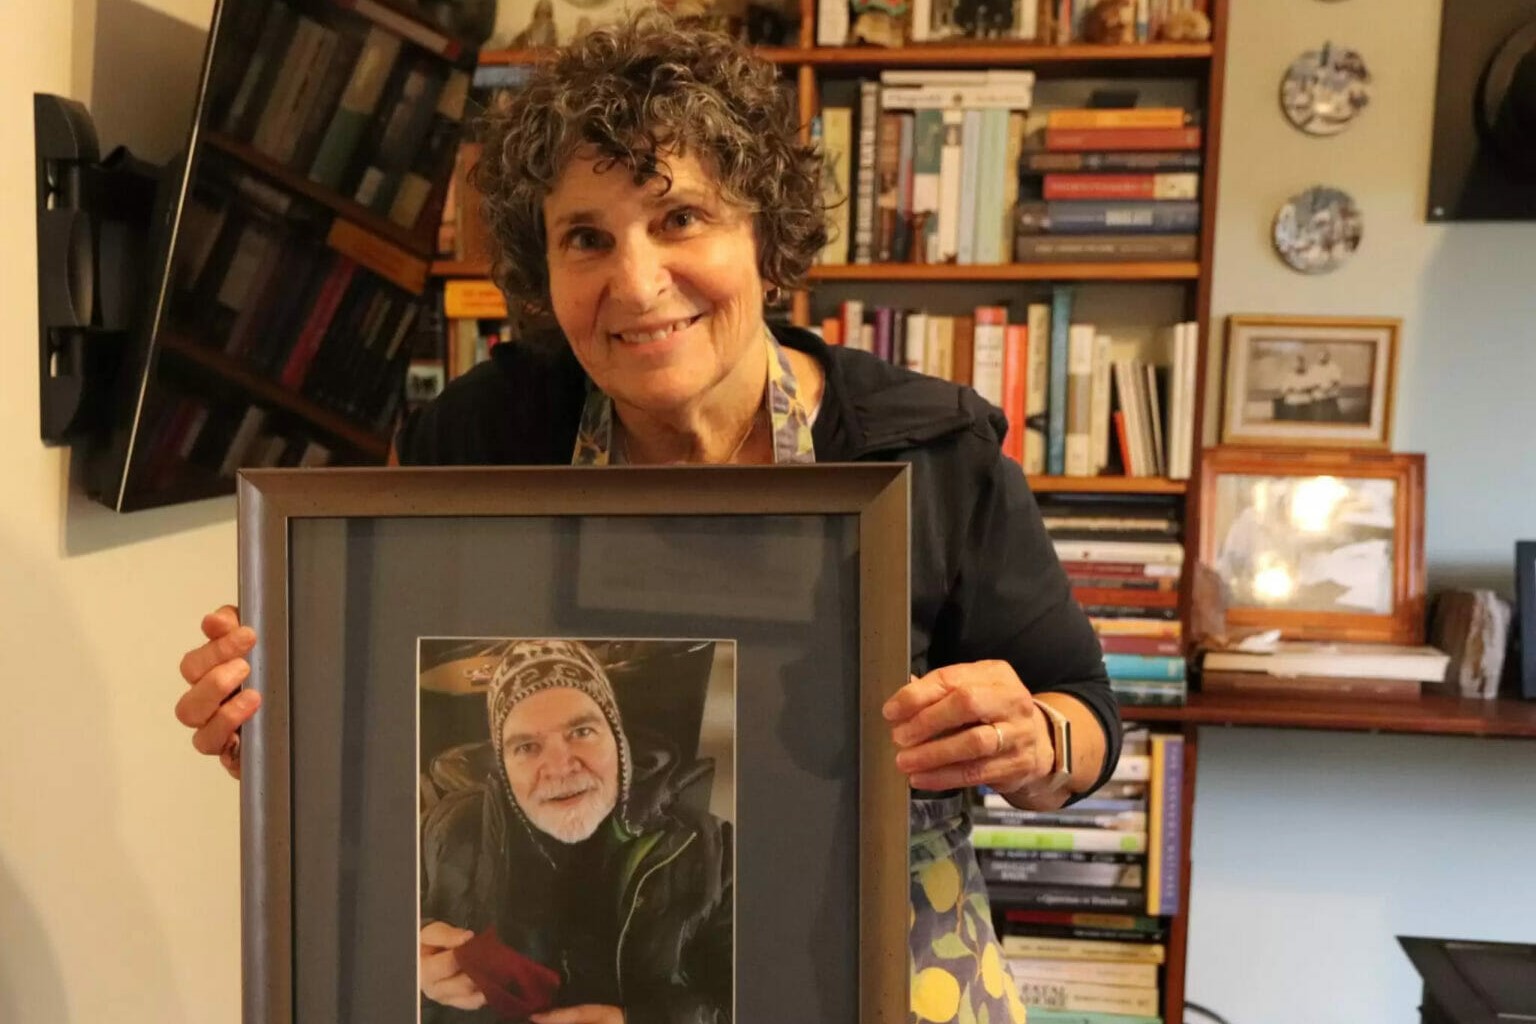 a woman holds a photograph of a man